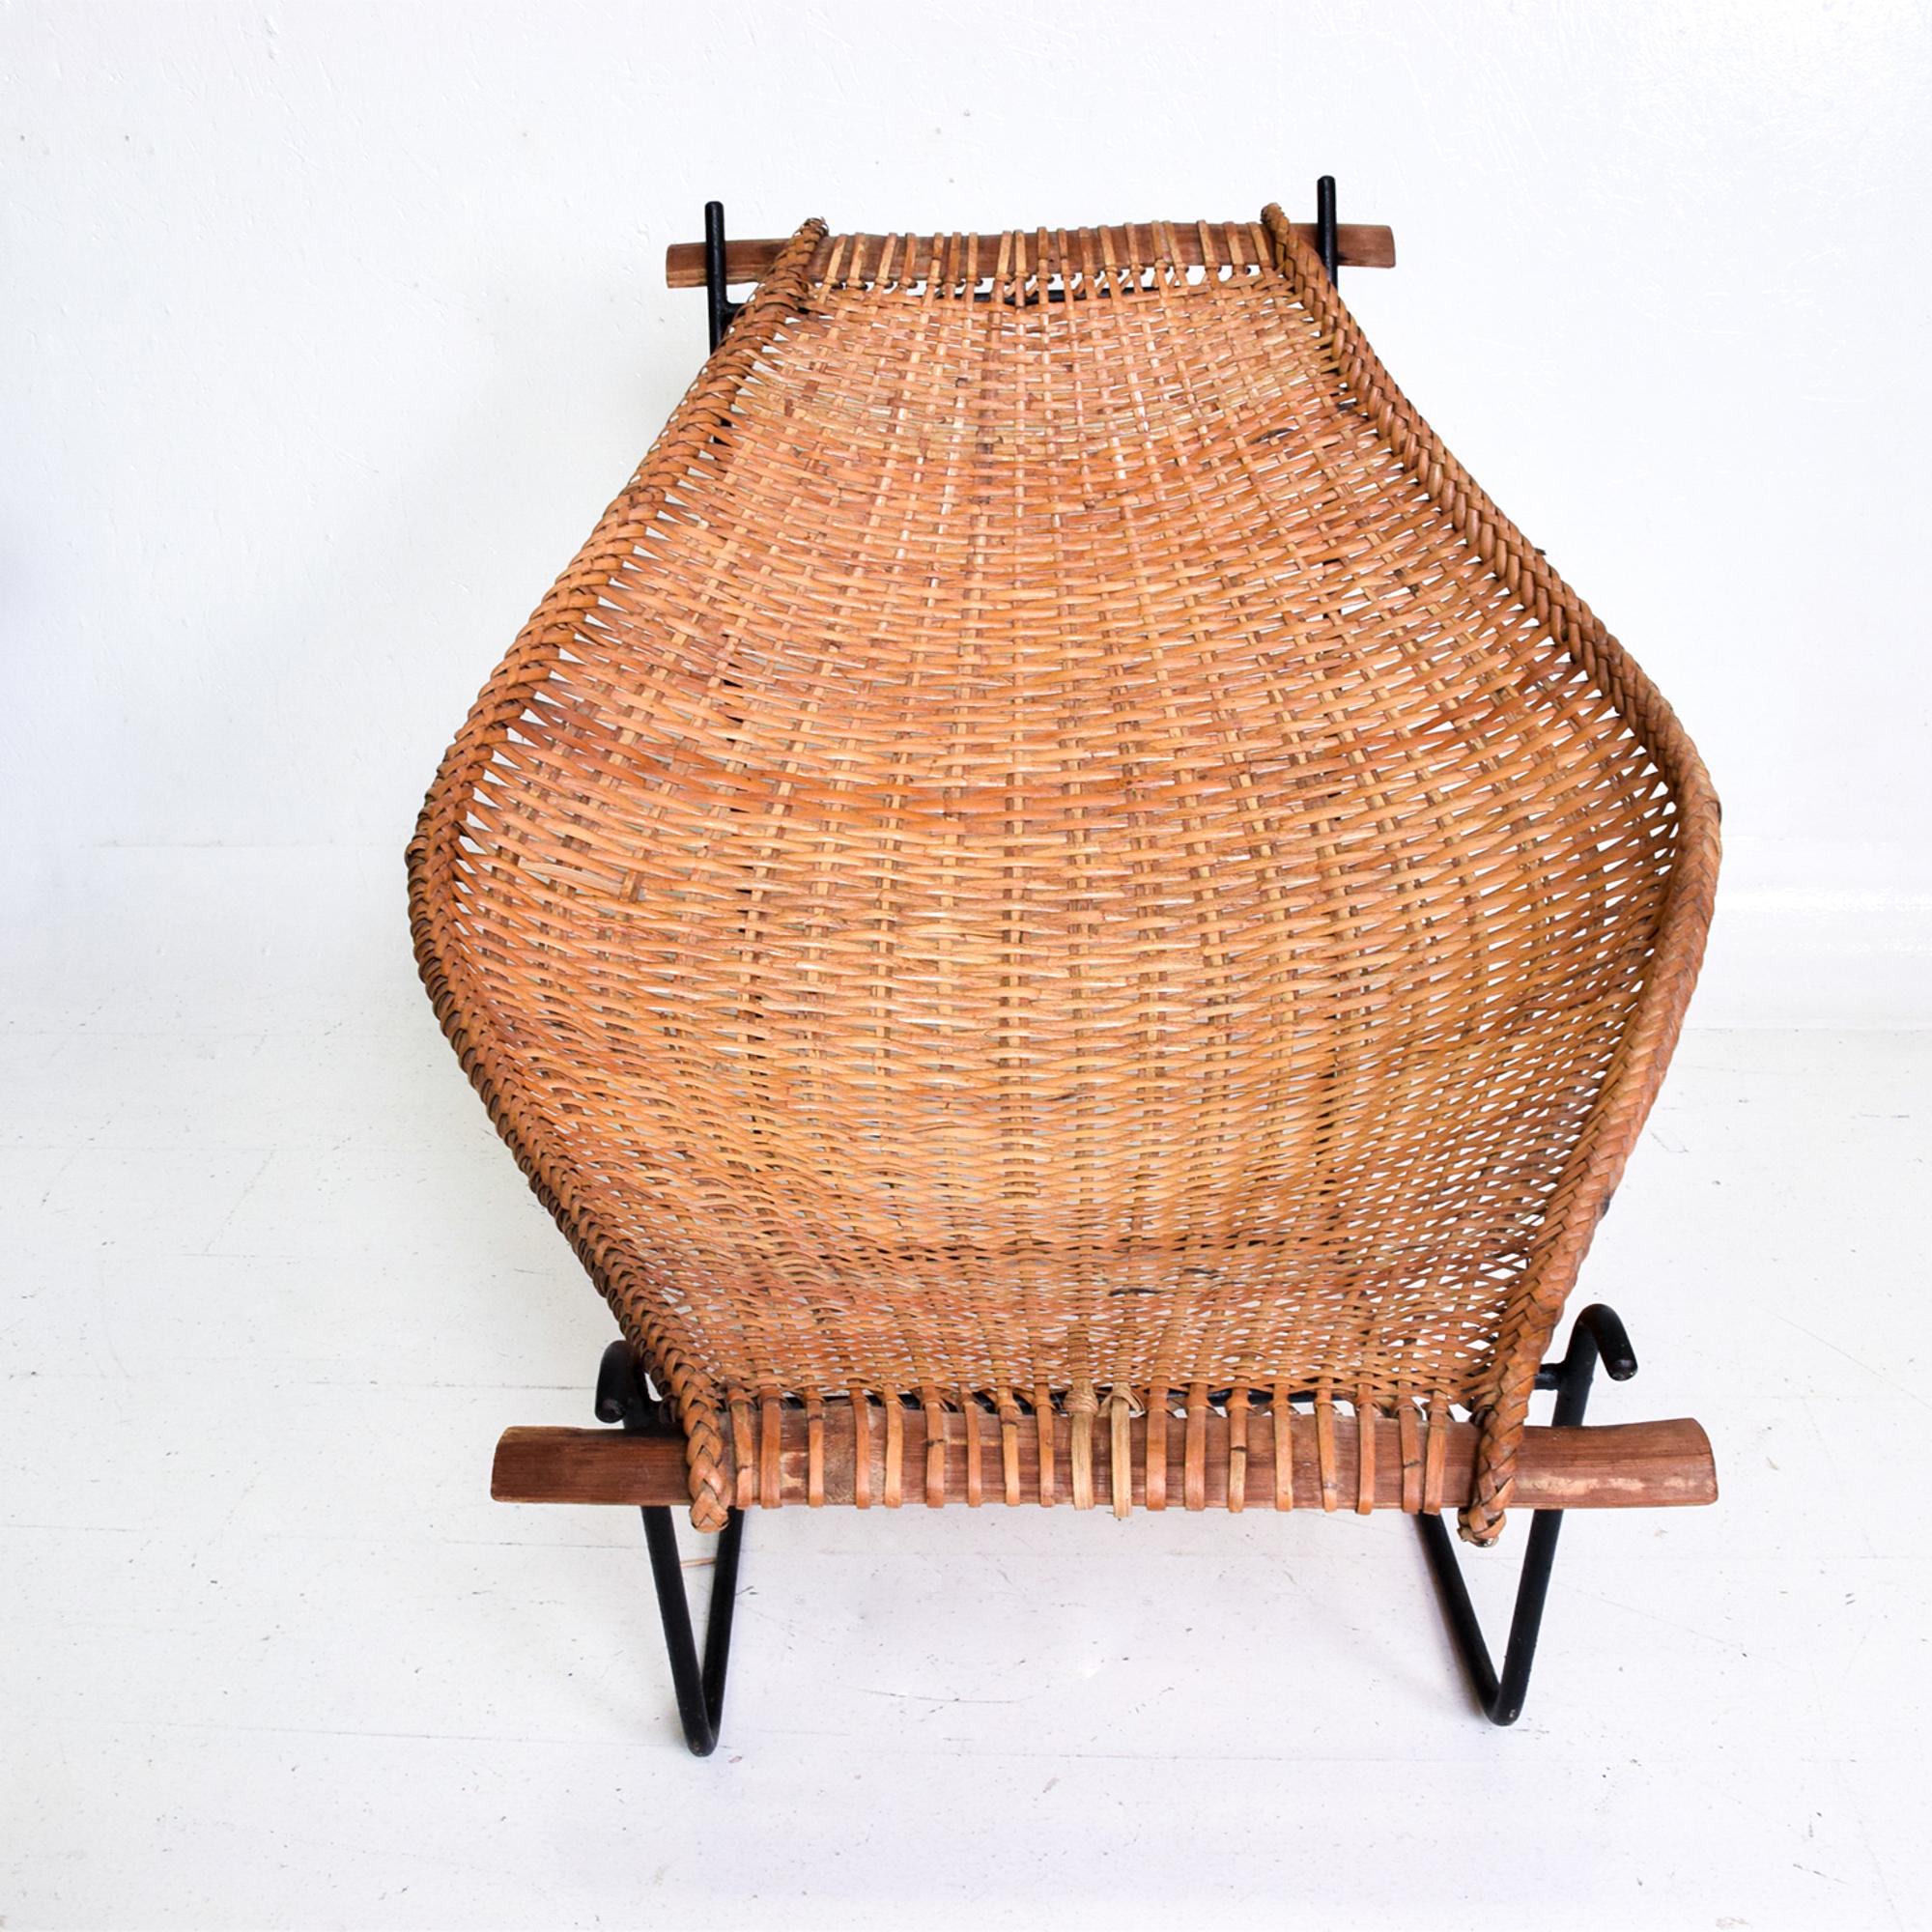 John Risley designer of the modernist Duyan: Relaxed handwoven rattan & iron lounge chair.
Minimal iron frame supports a curved cane sling finished braided edge with bamboo supports. 
Wonderful weaving craft & modern midcentury design from USA